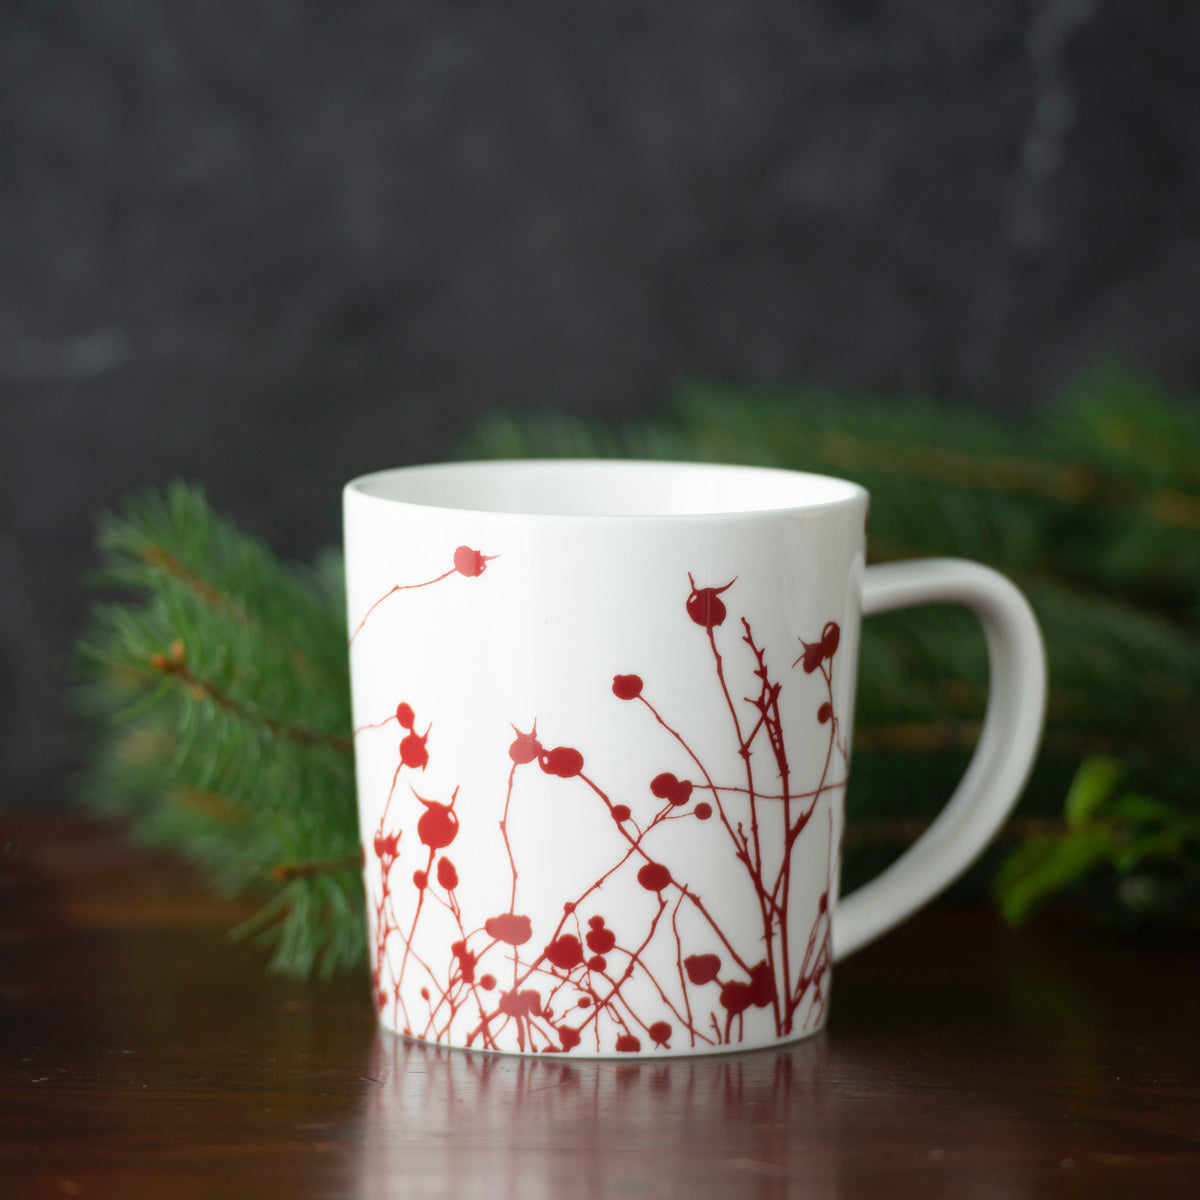 A generously sized, creamy white porcelain Caskata Artisanal Home Winterberries Mug with a red, floral branch design sits on a wooden surface, with green foliage in the background.